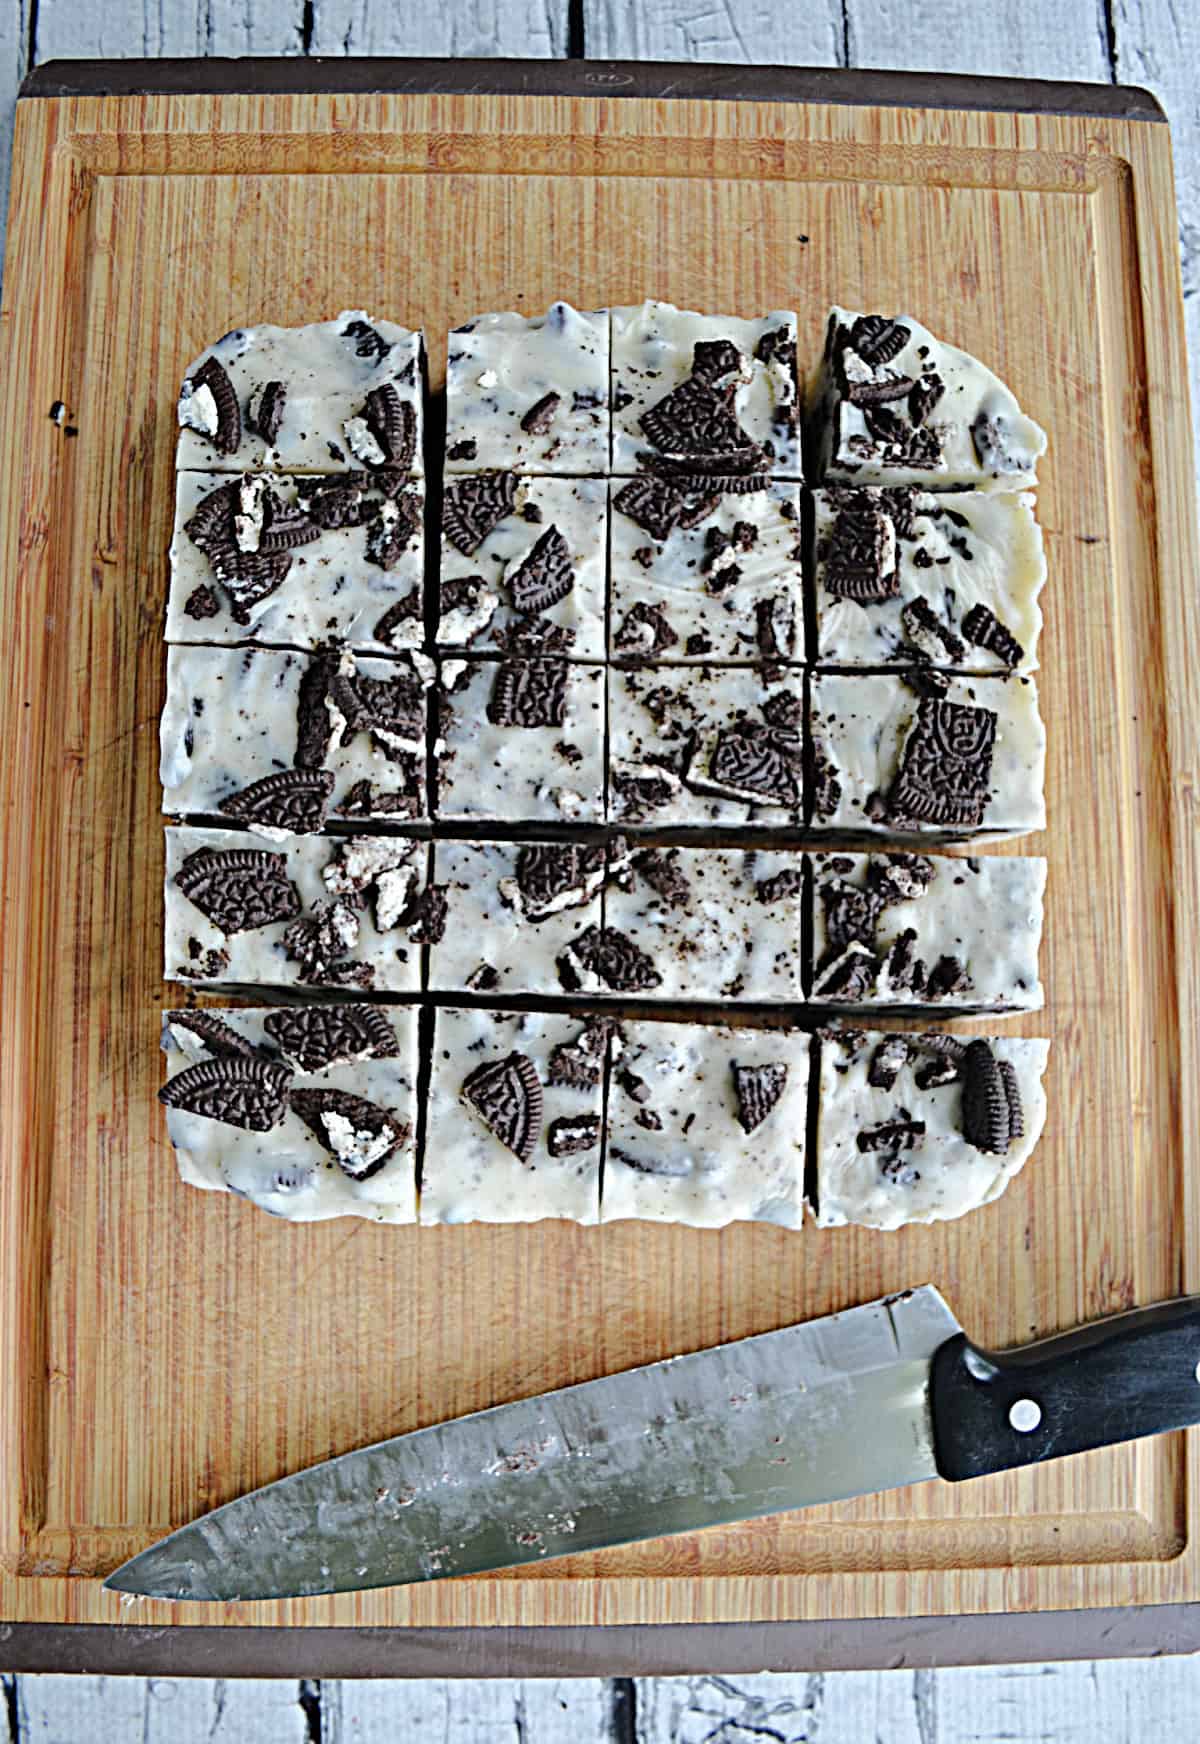 OREO fudge cut into squares with the knife below the fudge.